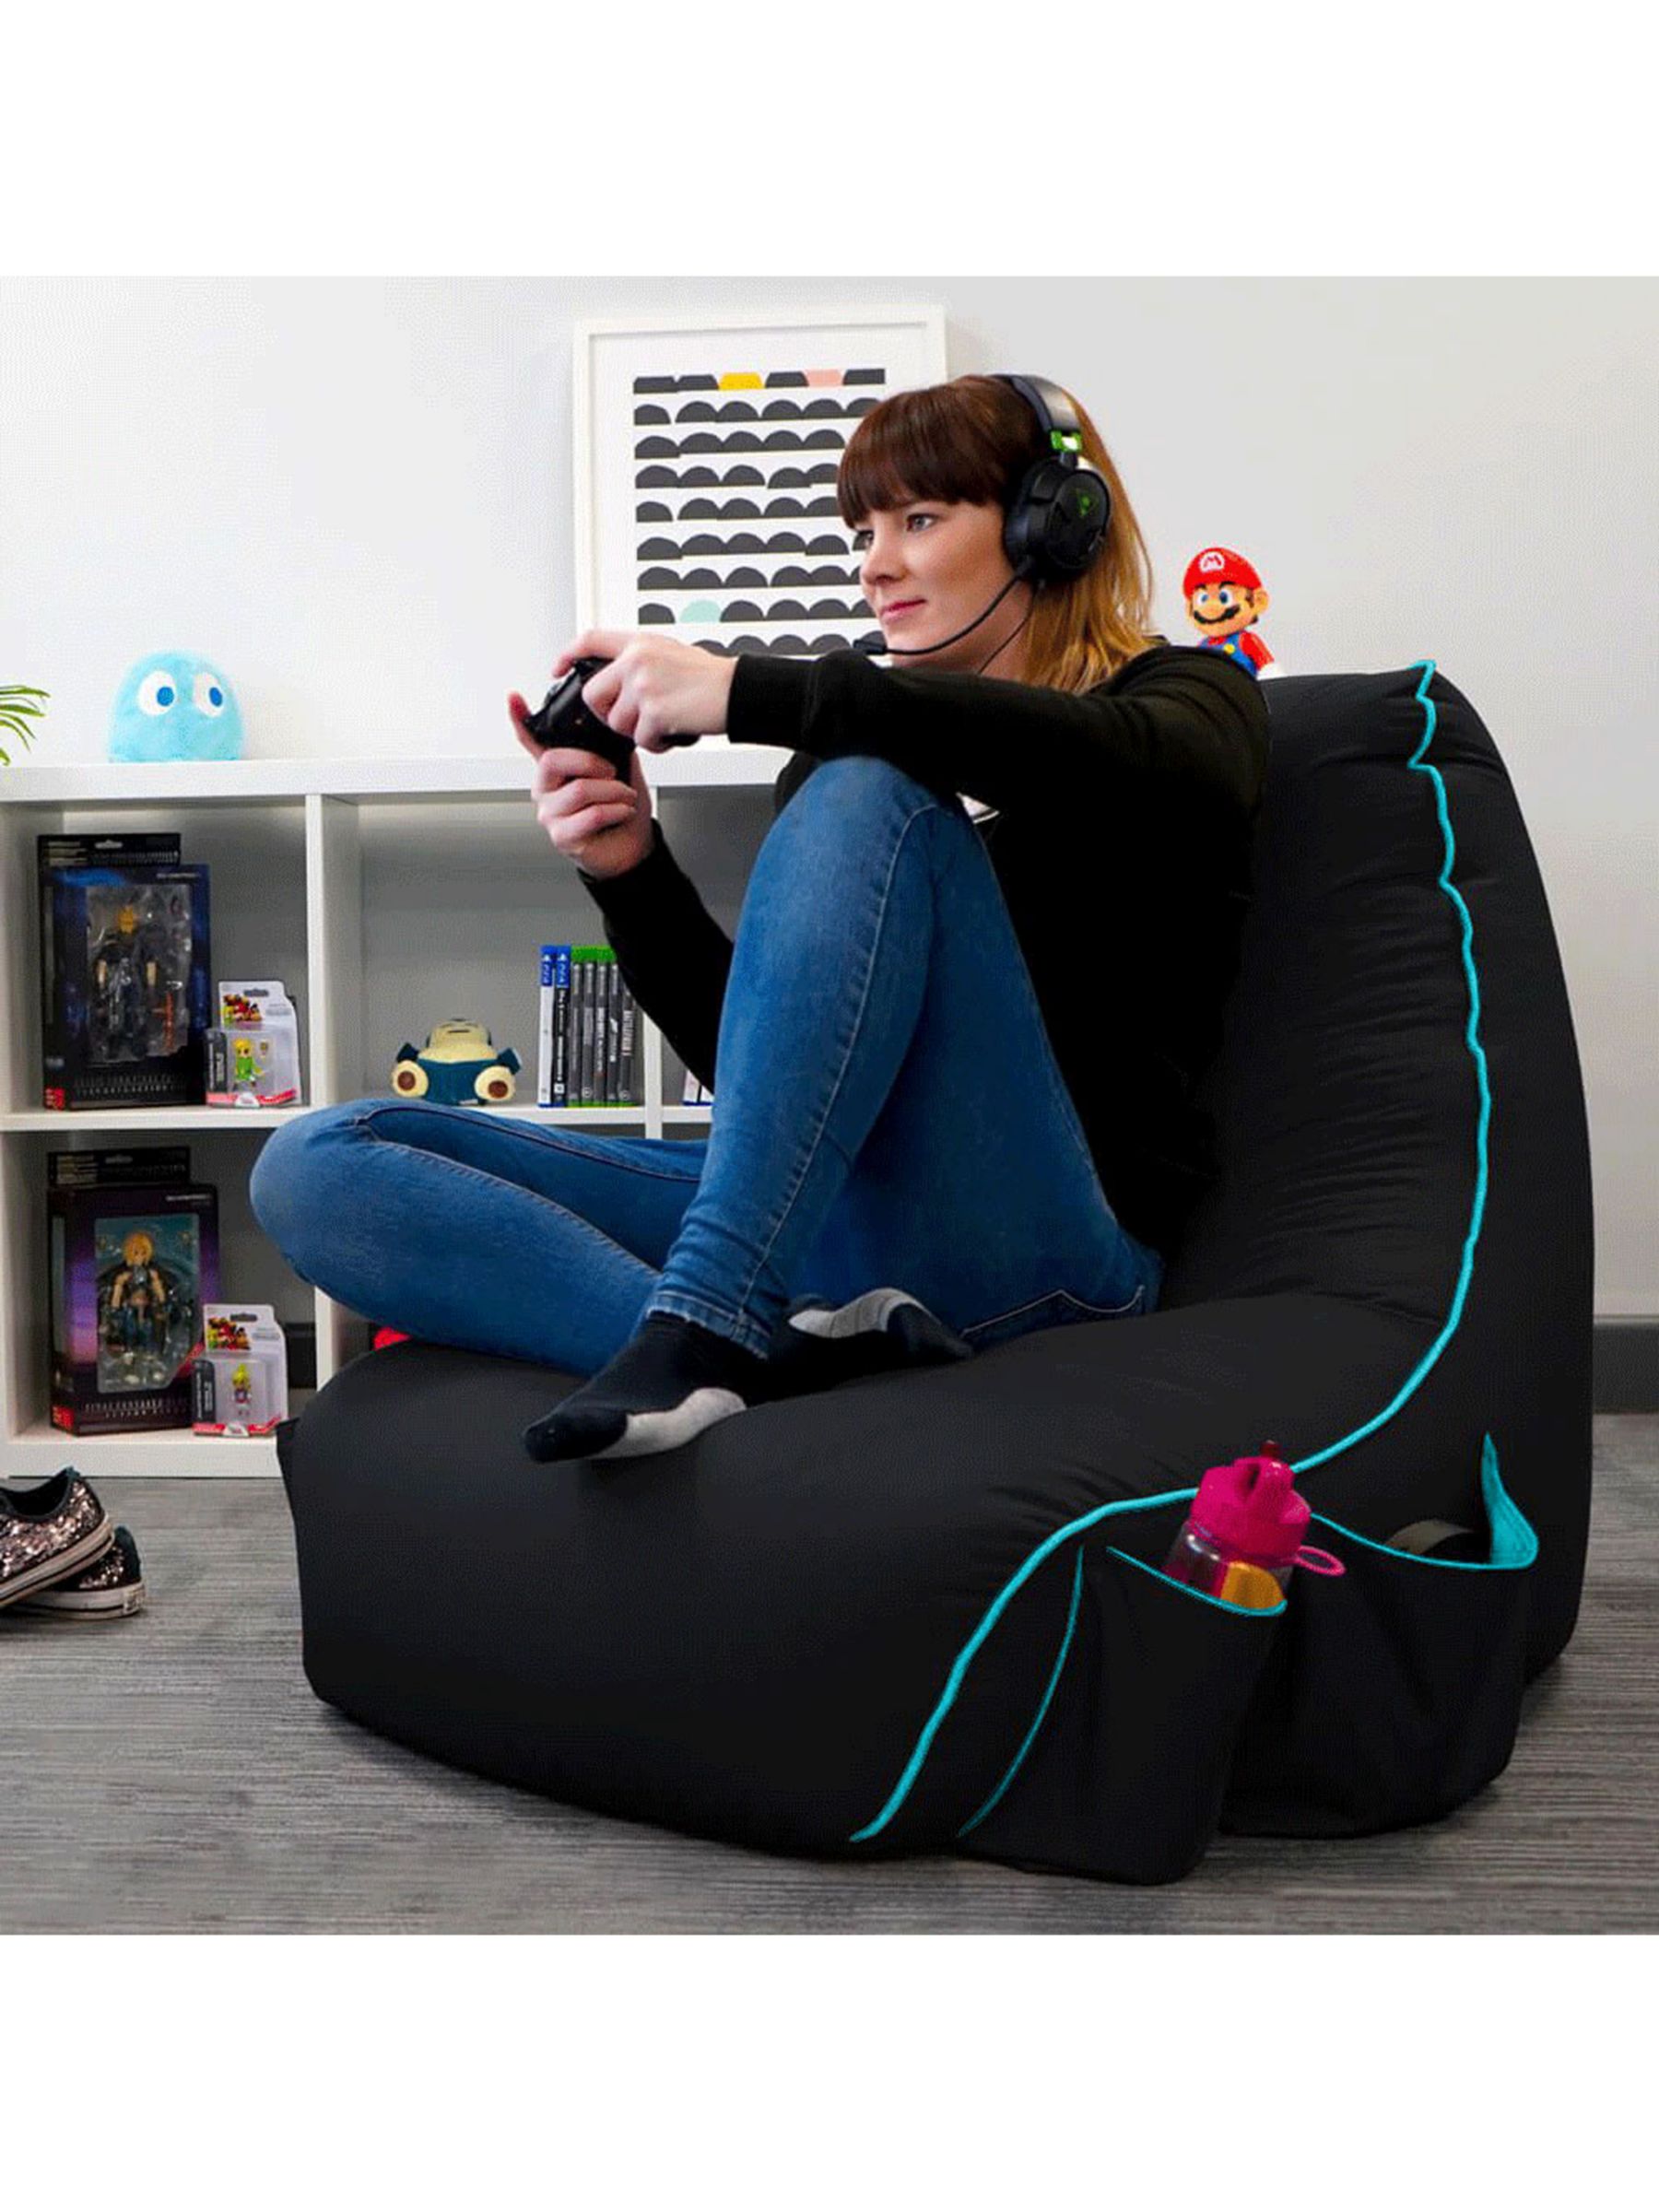 rucomfy rugame Gamer Indoor/ Outdoor Bean Bag Chair